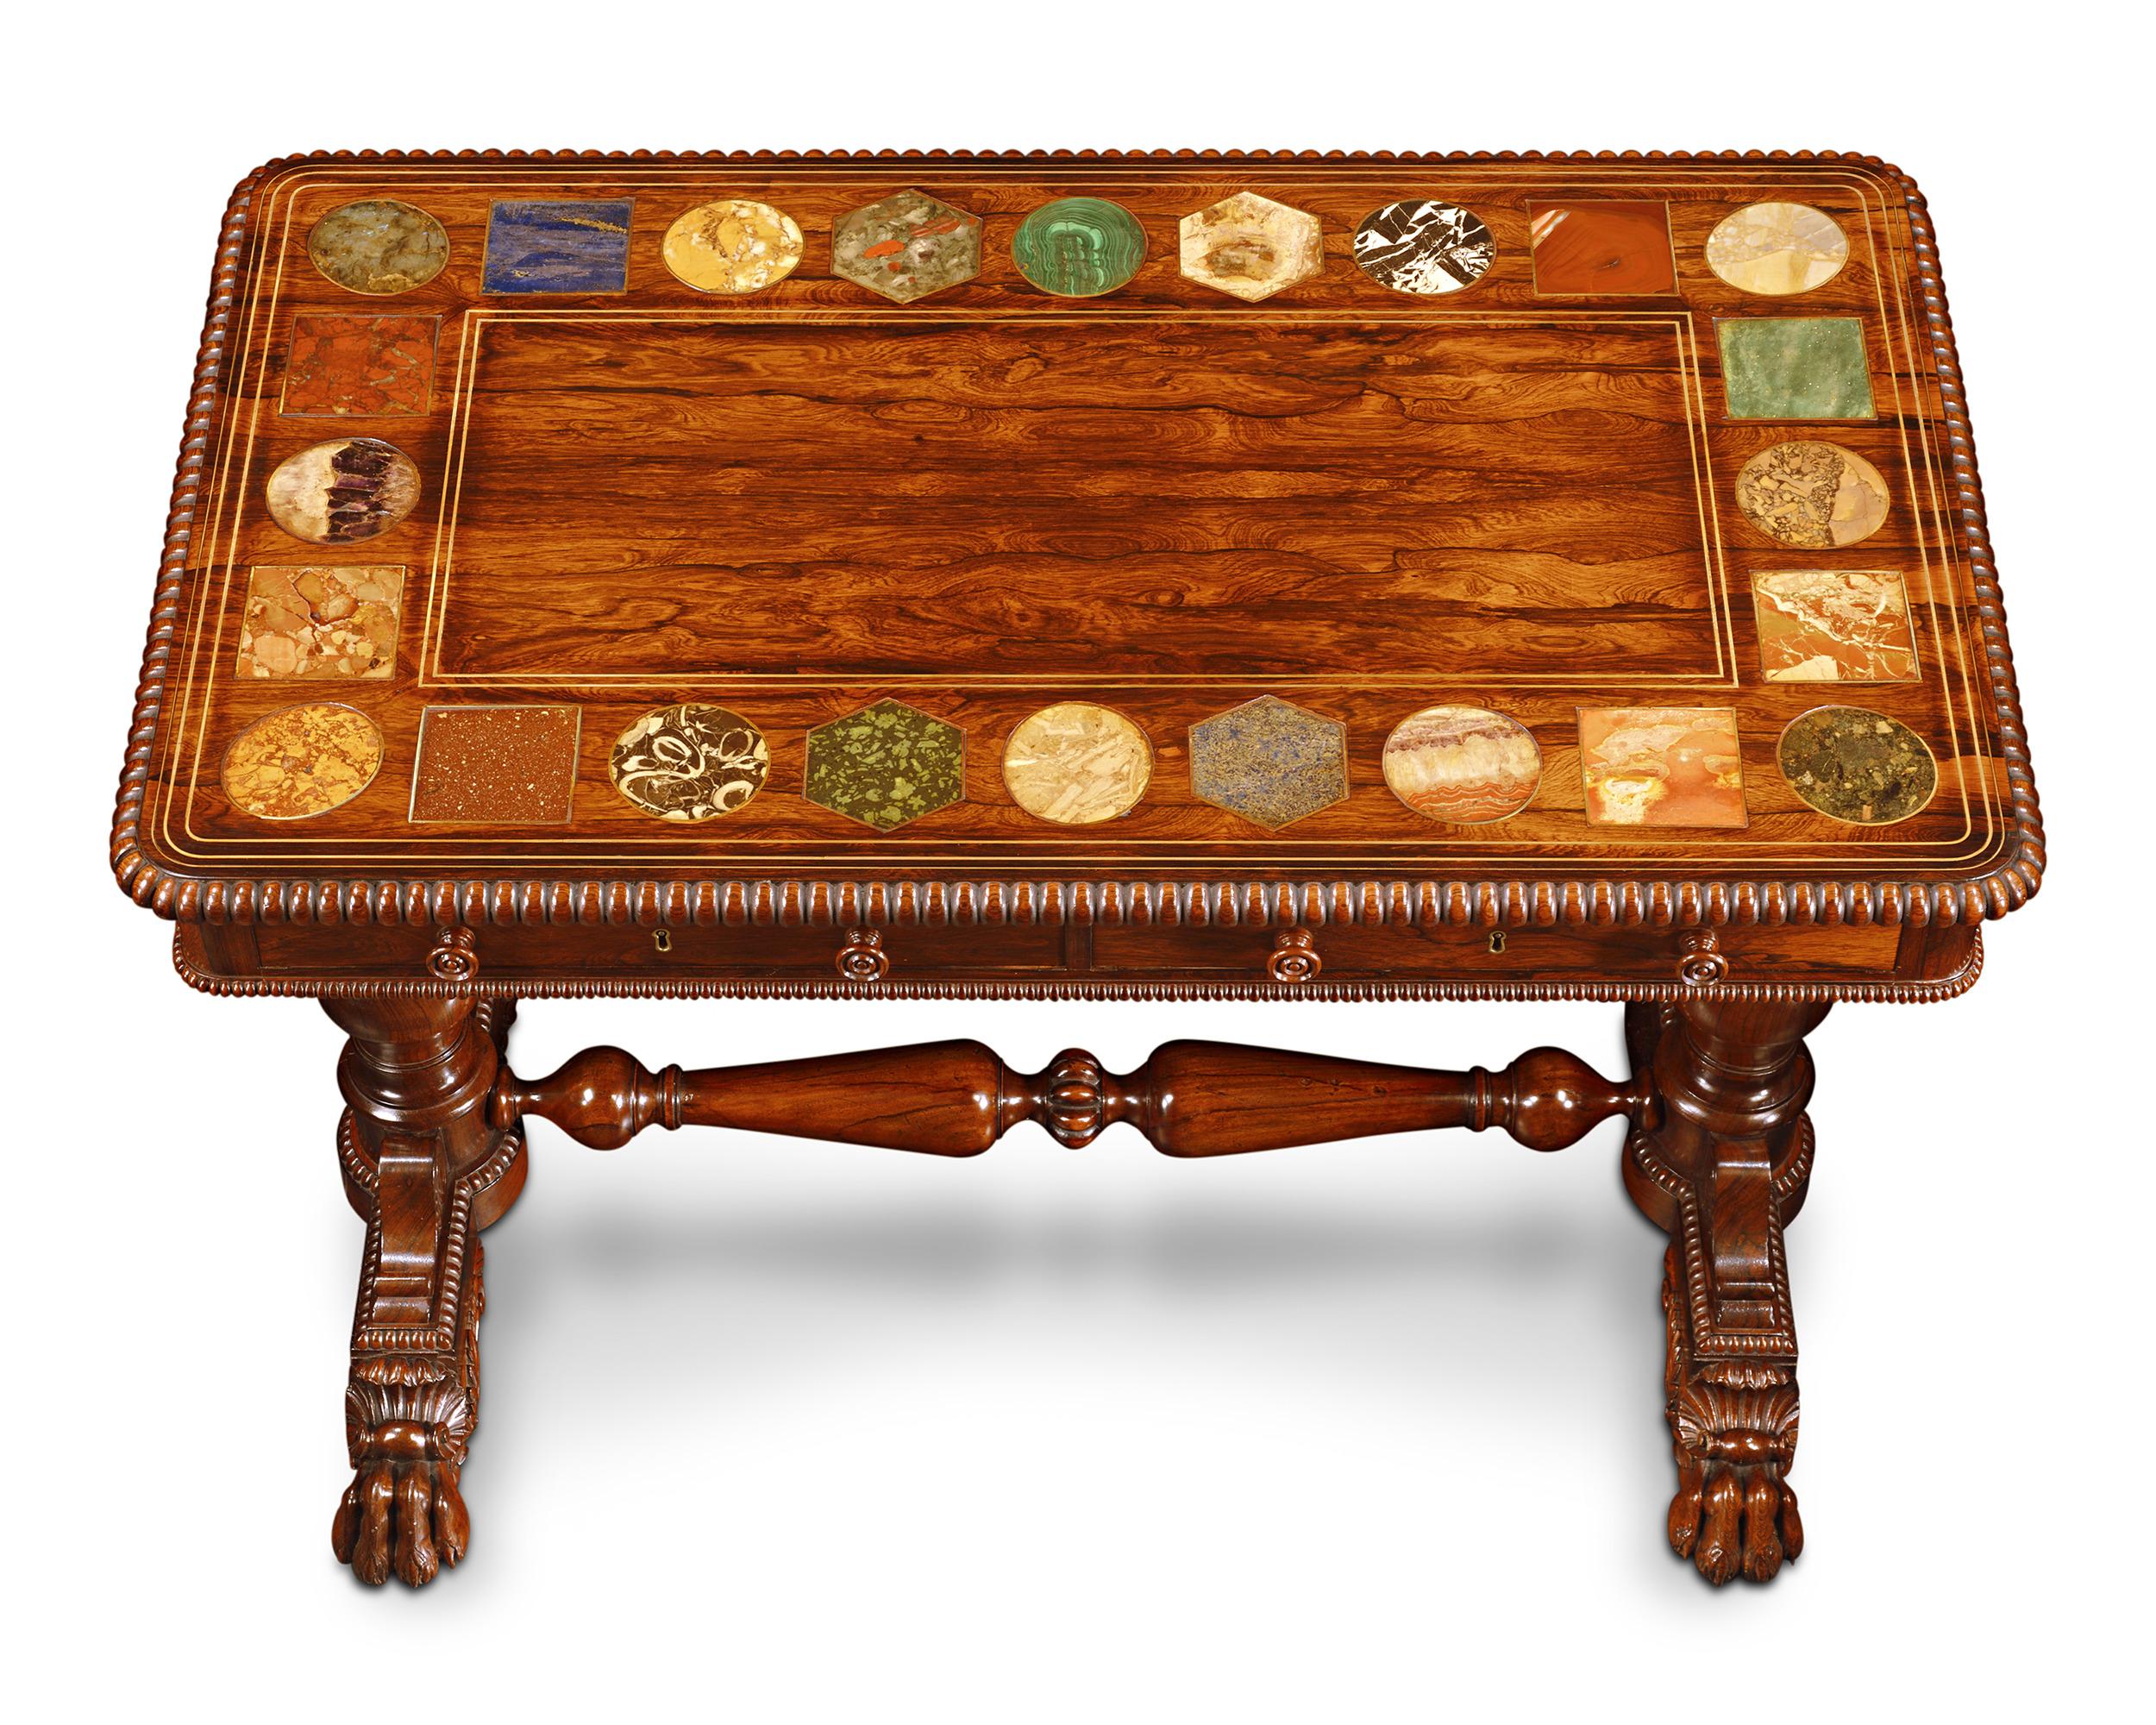 This remarkable rosewood centre table attributed to legendary firm Gillows showcases masterful craftsmanship and stunningly rare hardstone specimens. The table's base is ornately crafted, complete with lion's paw feet, emphasizing the quality of the